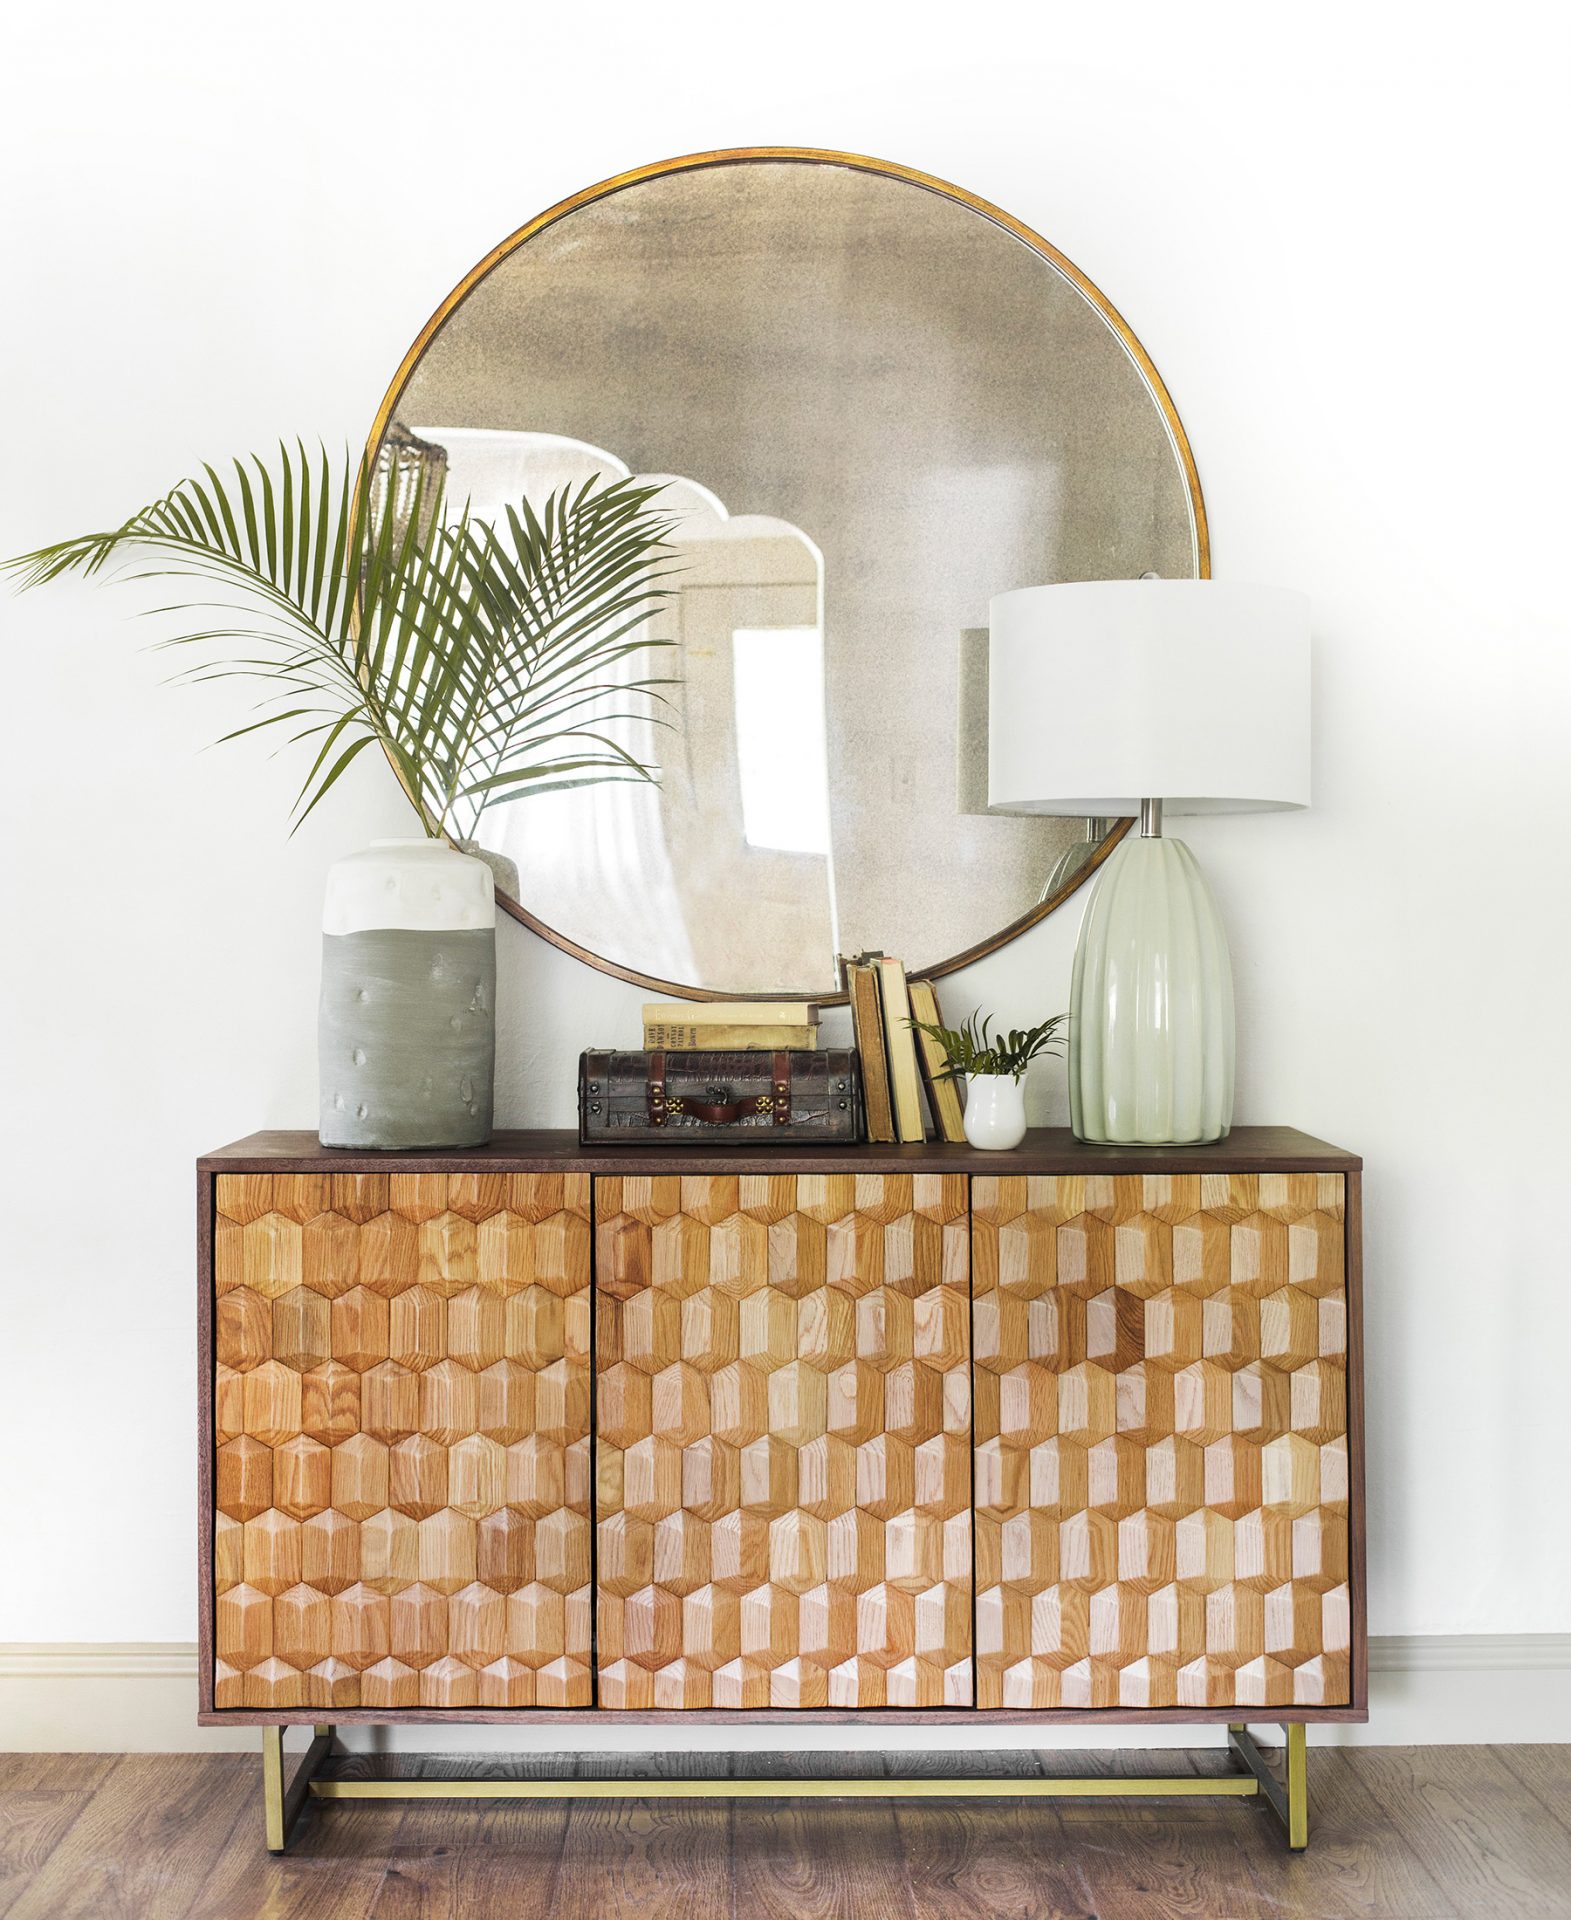 Living Room Storage Ideas: The Sideboard - Articulate